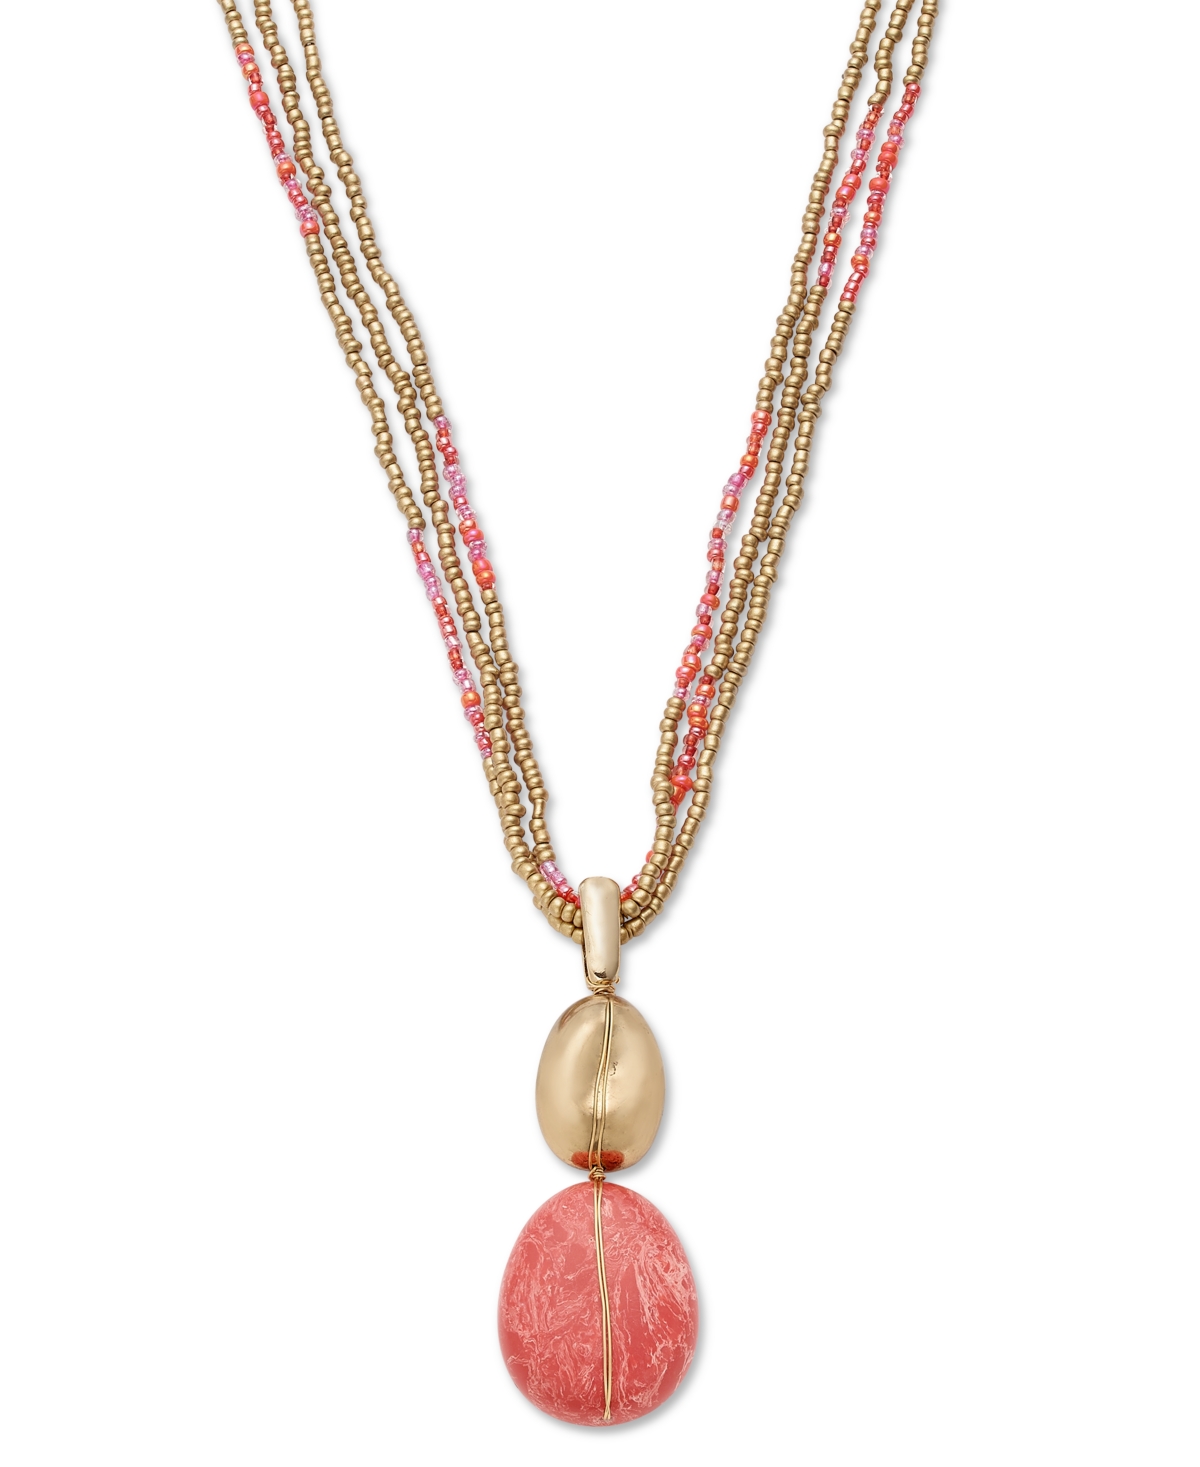 Stone & Seed Bead Multi-Chain Pendant Necklace, 17" + 3" extender, Created for Macy's - Coral